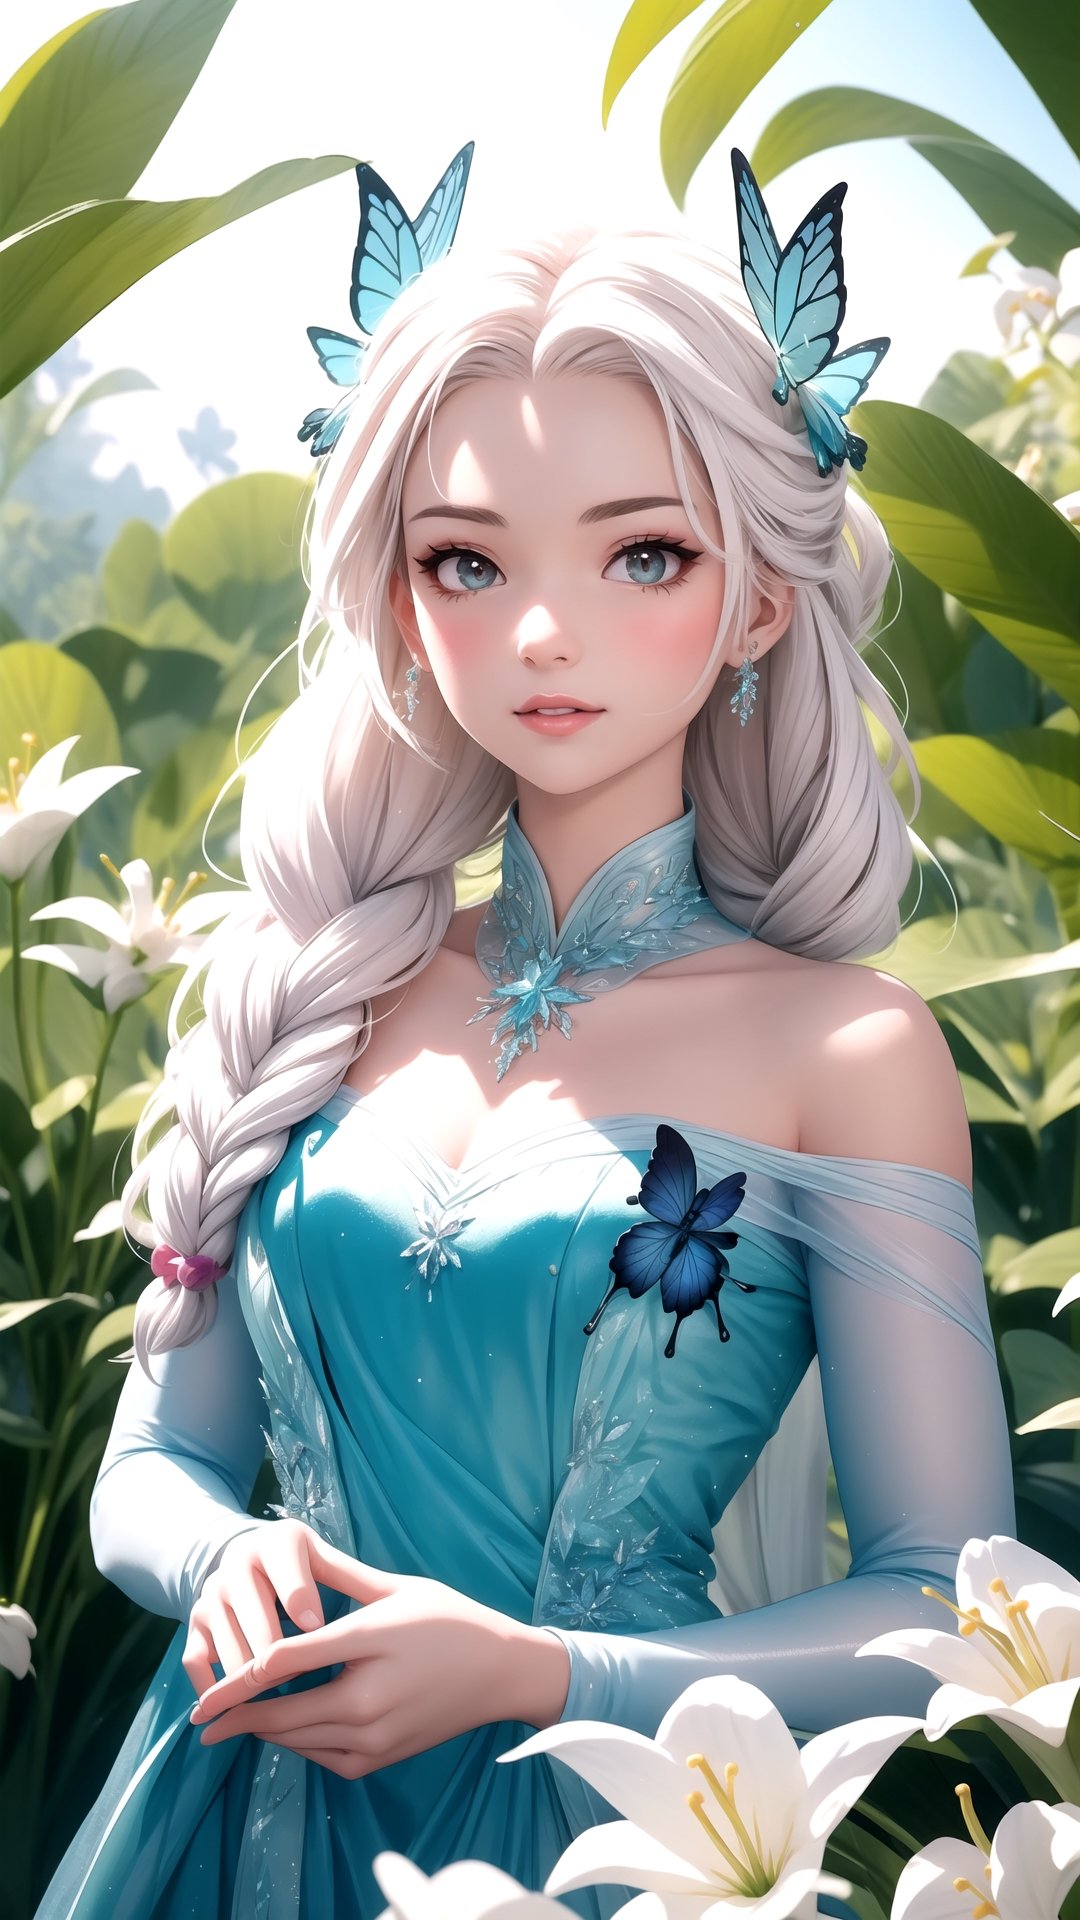 Real-life Elsa from Frozen, who travels the world as a social media influencer, wore eye makeup from Disney's Frozen on a lavish floral Versailles balcony while surrounded by magical butterflies Christmas Paradise 🦋 ✨ Colorful lights hanging on the lily of the valley, photo style - realistic techniques, kawaii aesthetics, cute and colorful, colorful garden, colorful, naturecore, realistic use of light and color